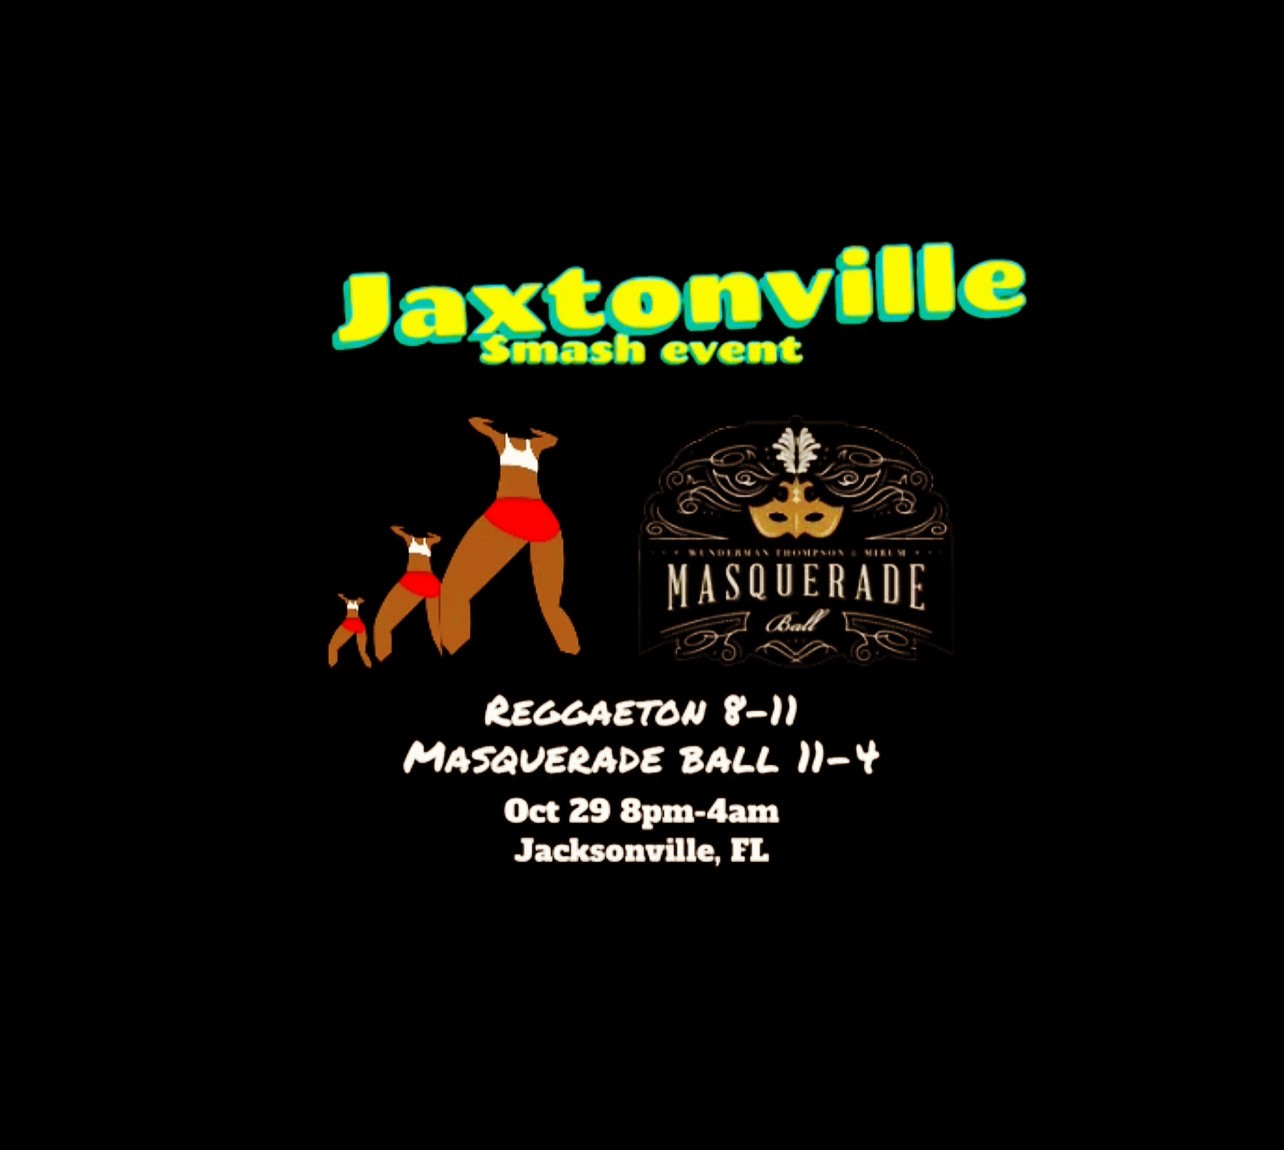 Jaxtonville Smash Event on oct. 29, 20:00@Clubhouse - Buy tickets and Get information on www.jaxtonville.com 